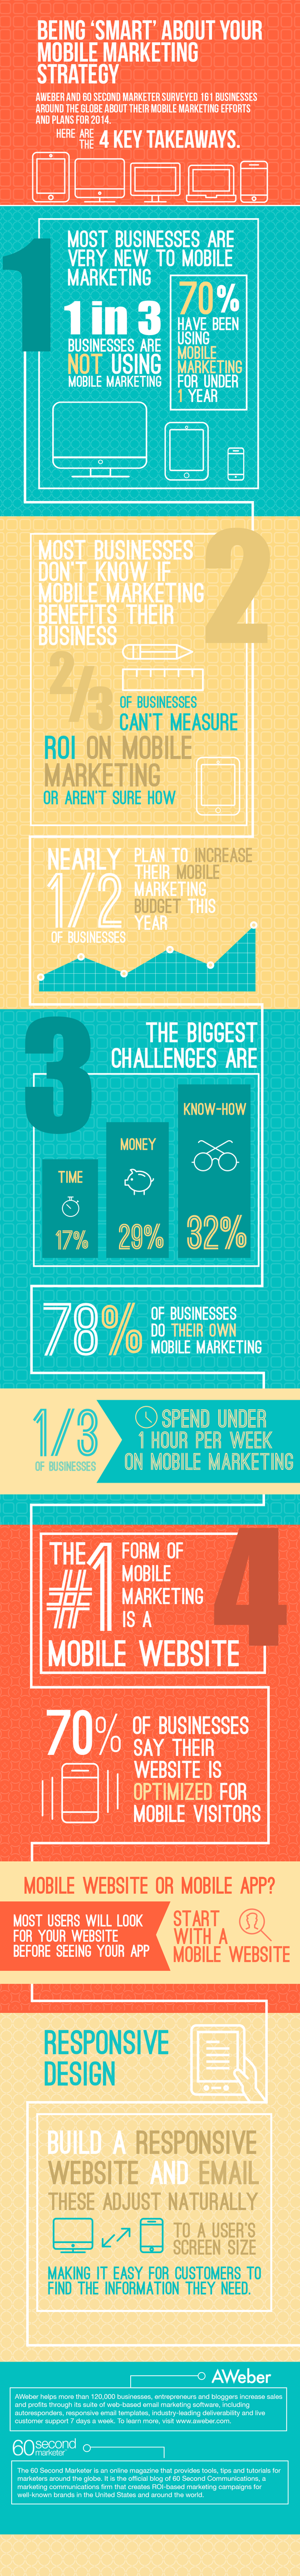 infographic-mobile-marketing.png